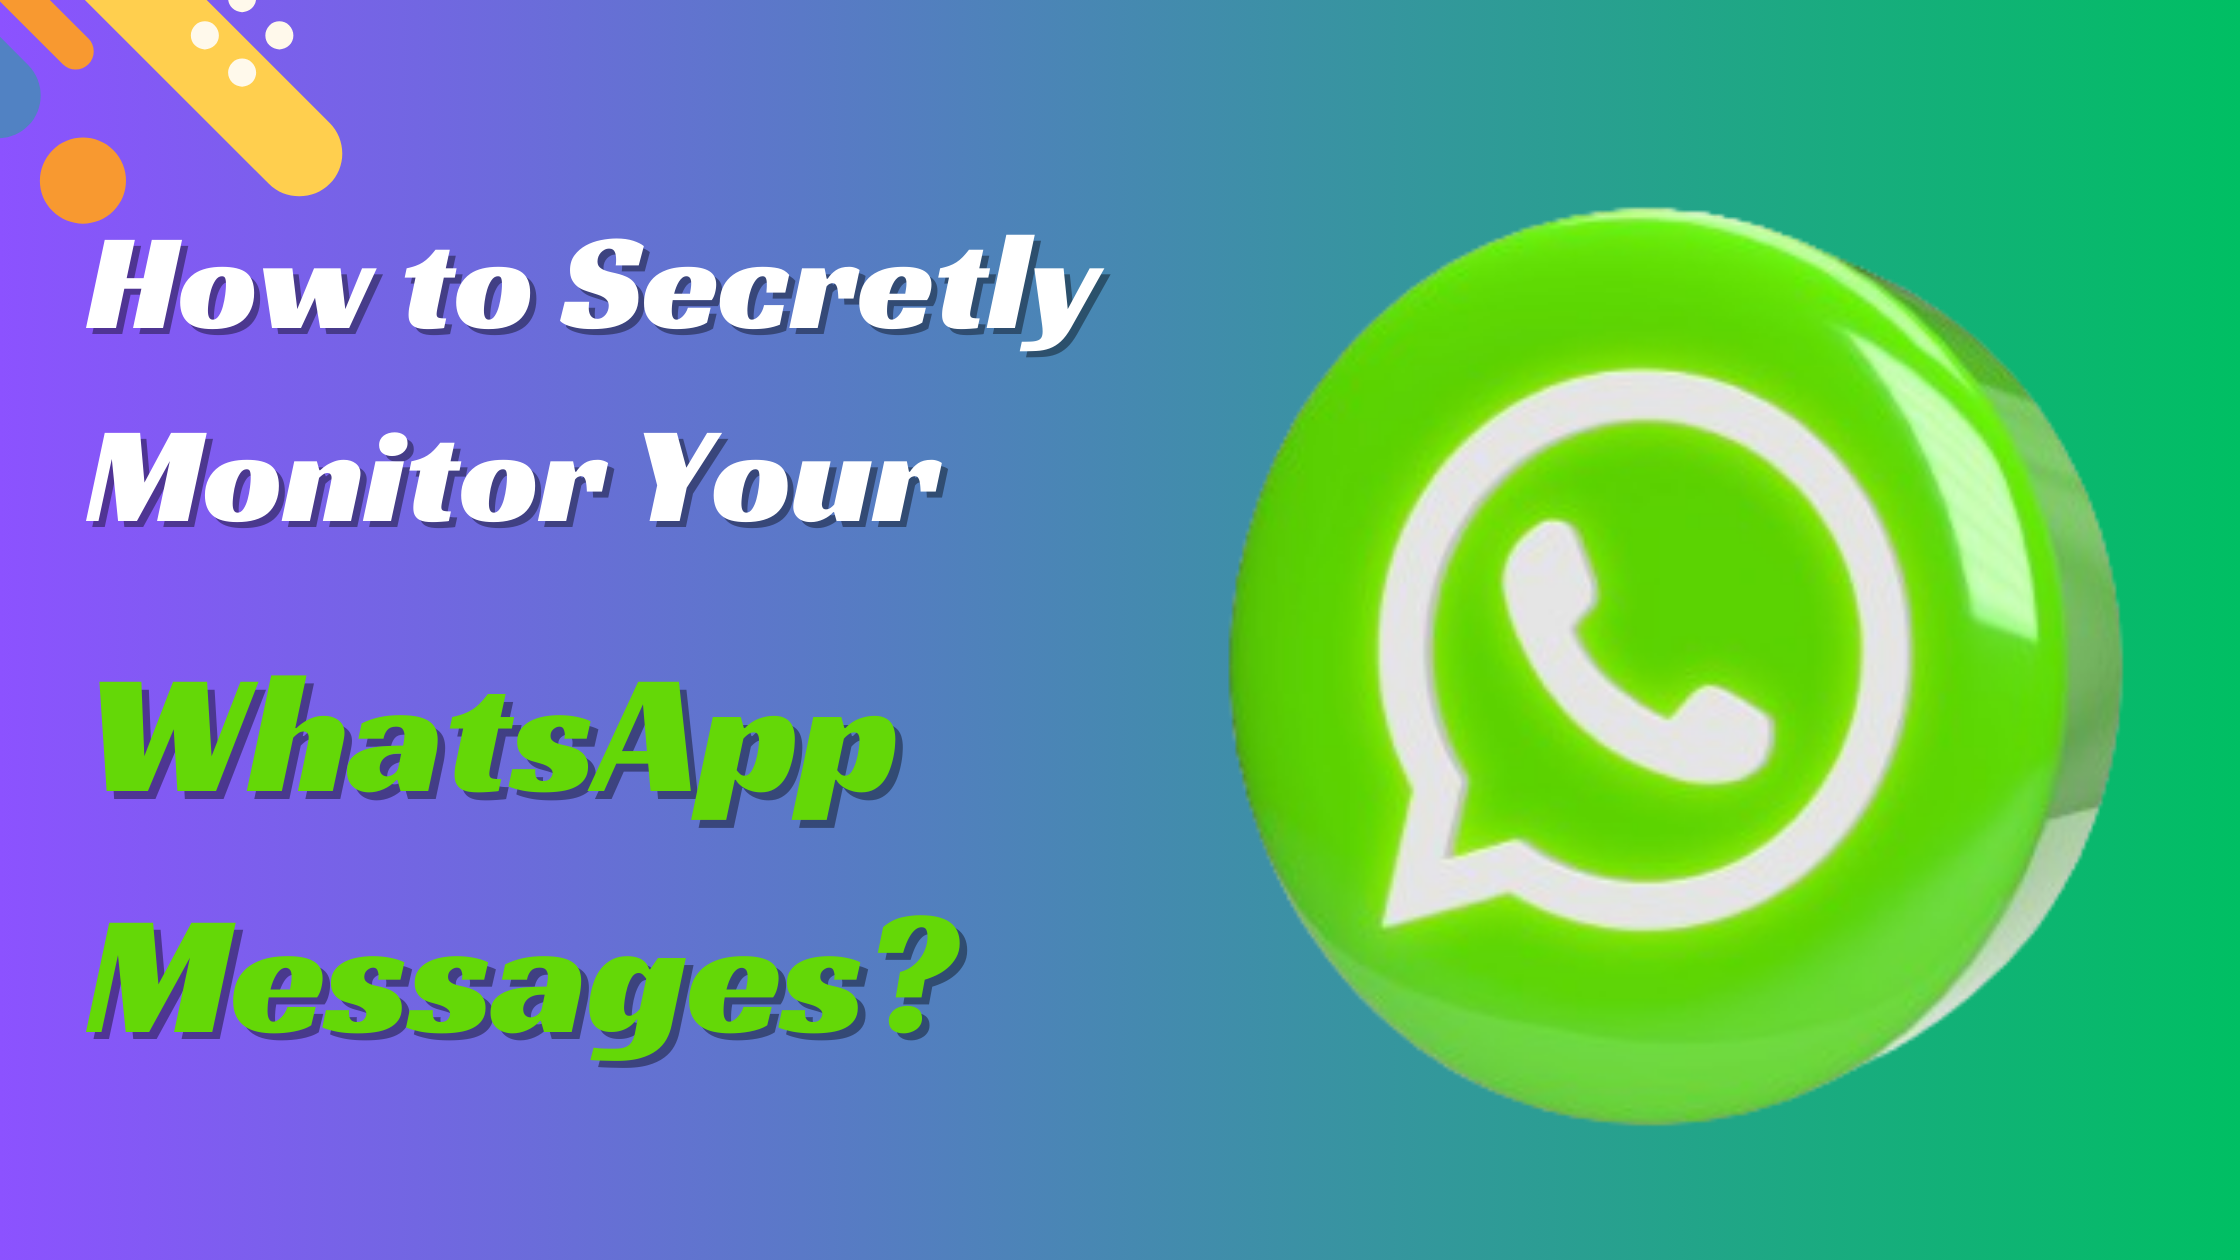 How to Secretly Monitor Your WhatsApp Messages?